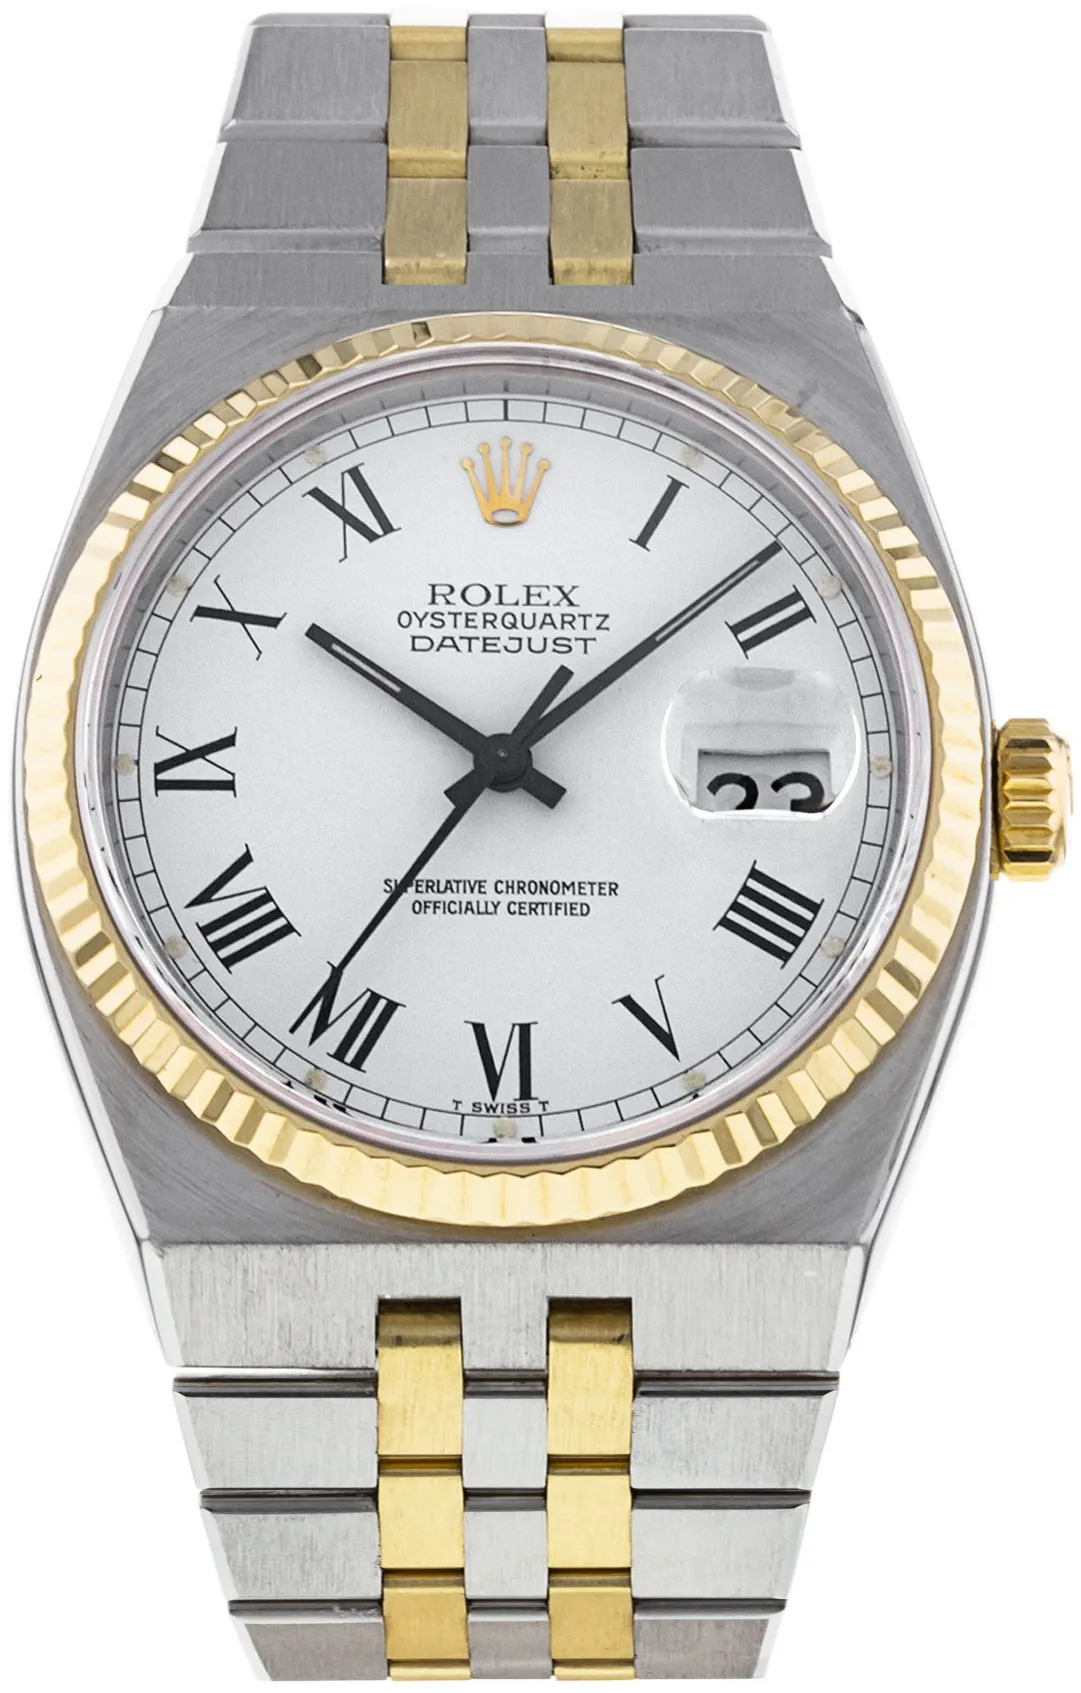 Rolex Datejust Oysterquartz 17013 36mm Yellow gold and stainless steel White